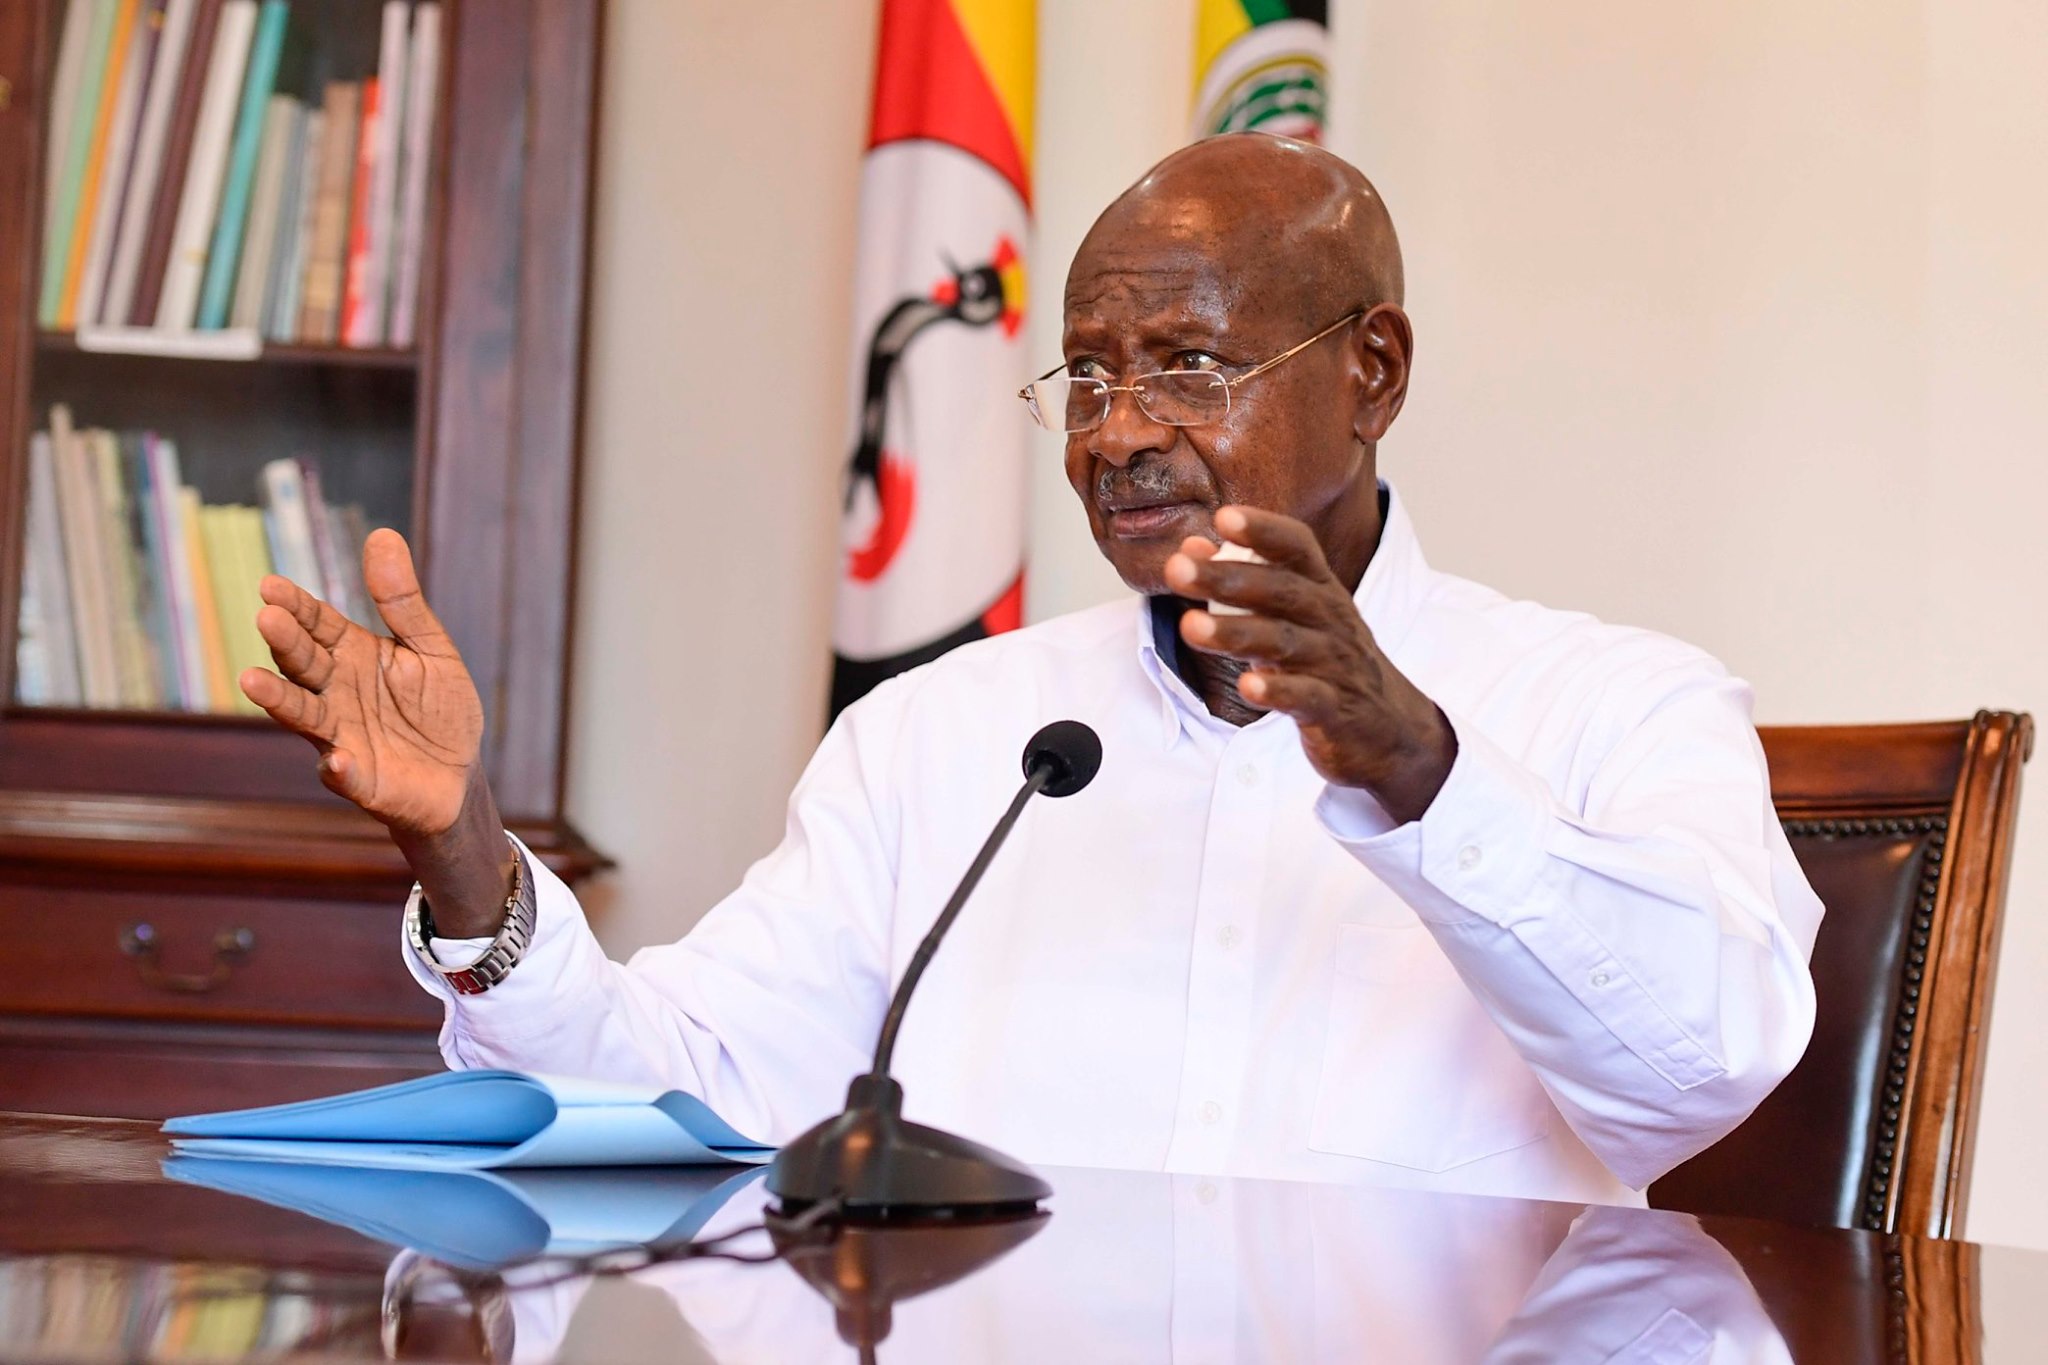 Museveni: I Did Not Want Aceng to Join Politics